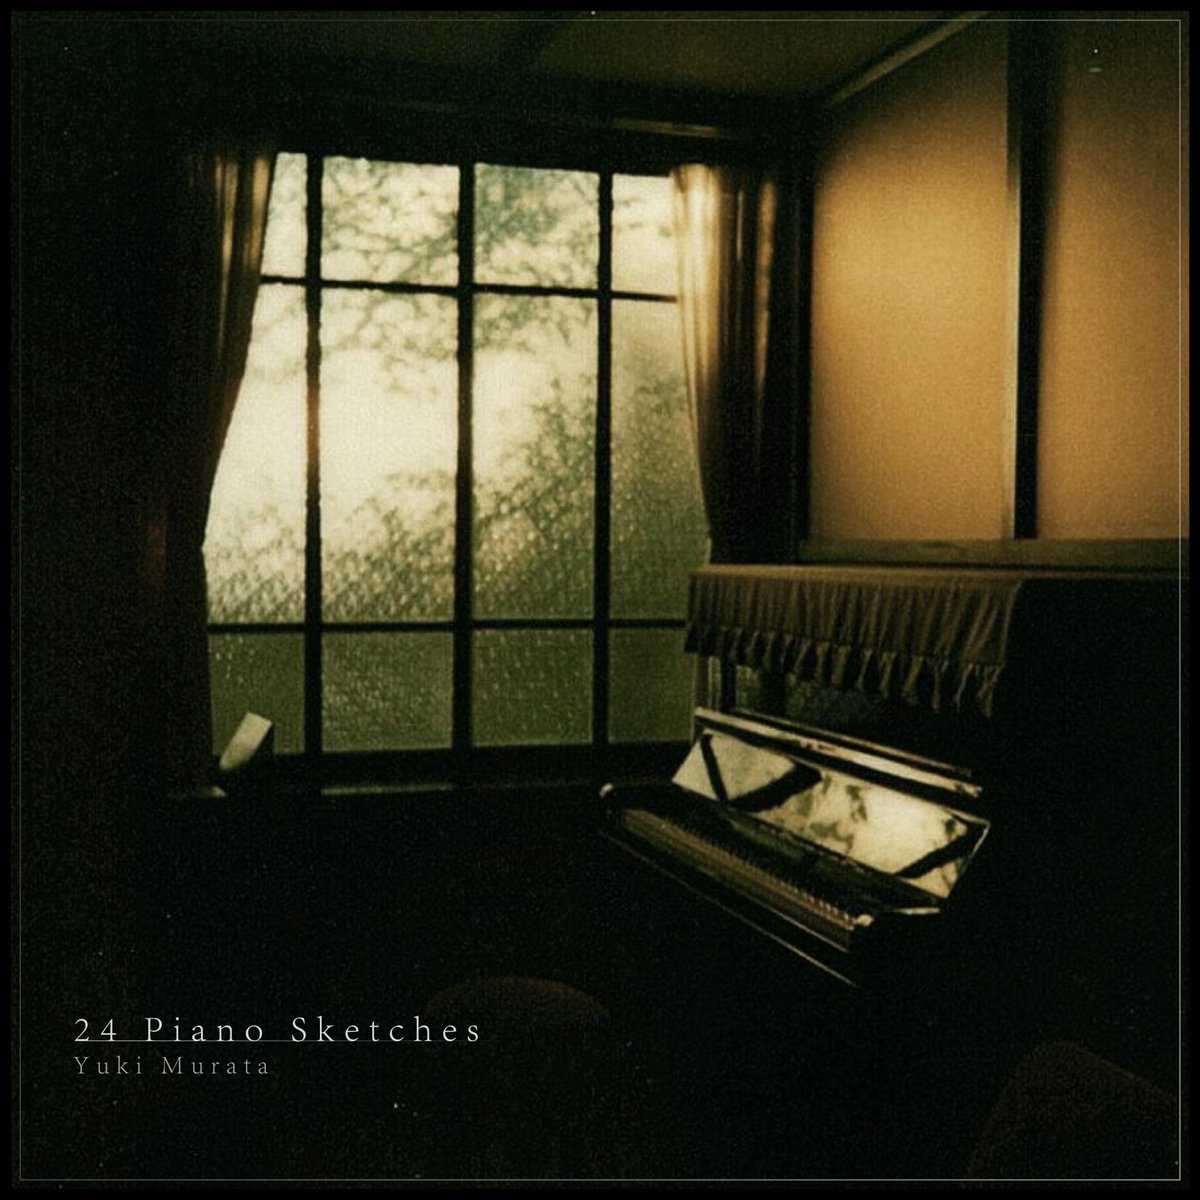 OUT TODAY: This is the 2nd track 'the flower orchard' from the pianist of Anoice, Yuki Murata's new solo album '24 Piano Sketches' which is going to add 2 songs every month and ultimately 24 songs in 1 year. Enjoy her lovely and nostalgic melodies. bit.ly/3JhhQdM